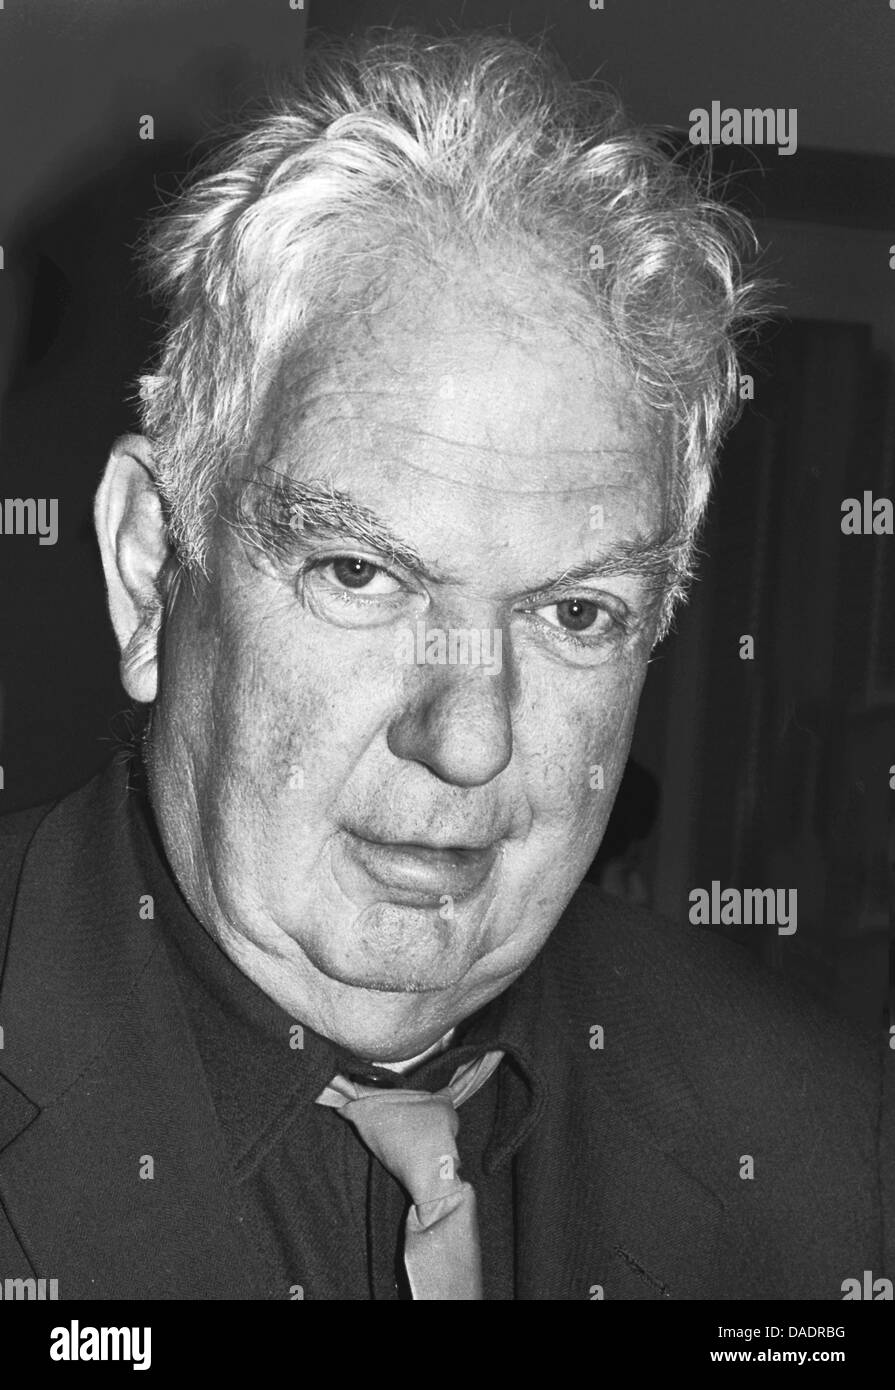 Artist Alexander Calder in 1952. Portrait by photographer Fred Stein (1909-1967) who emigrated 1933 from Nazi Germany to France and finally to the USA. Stock Photo